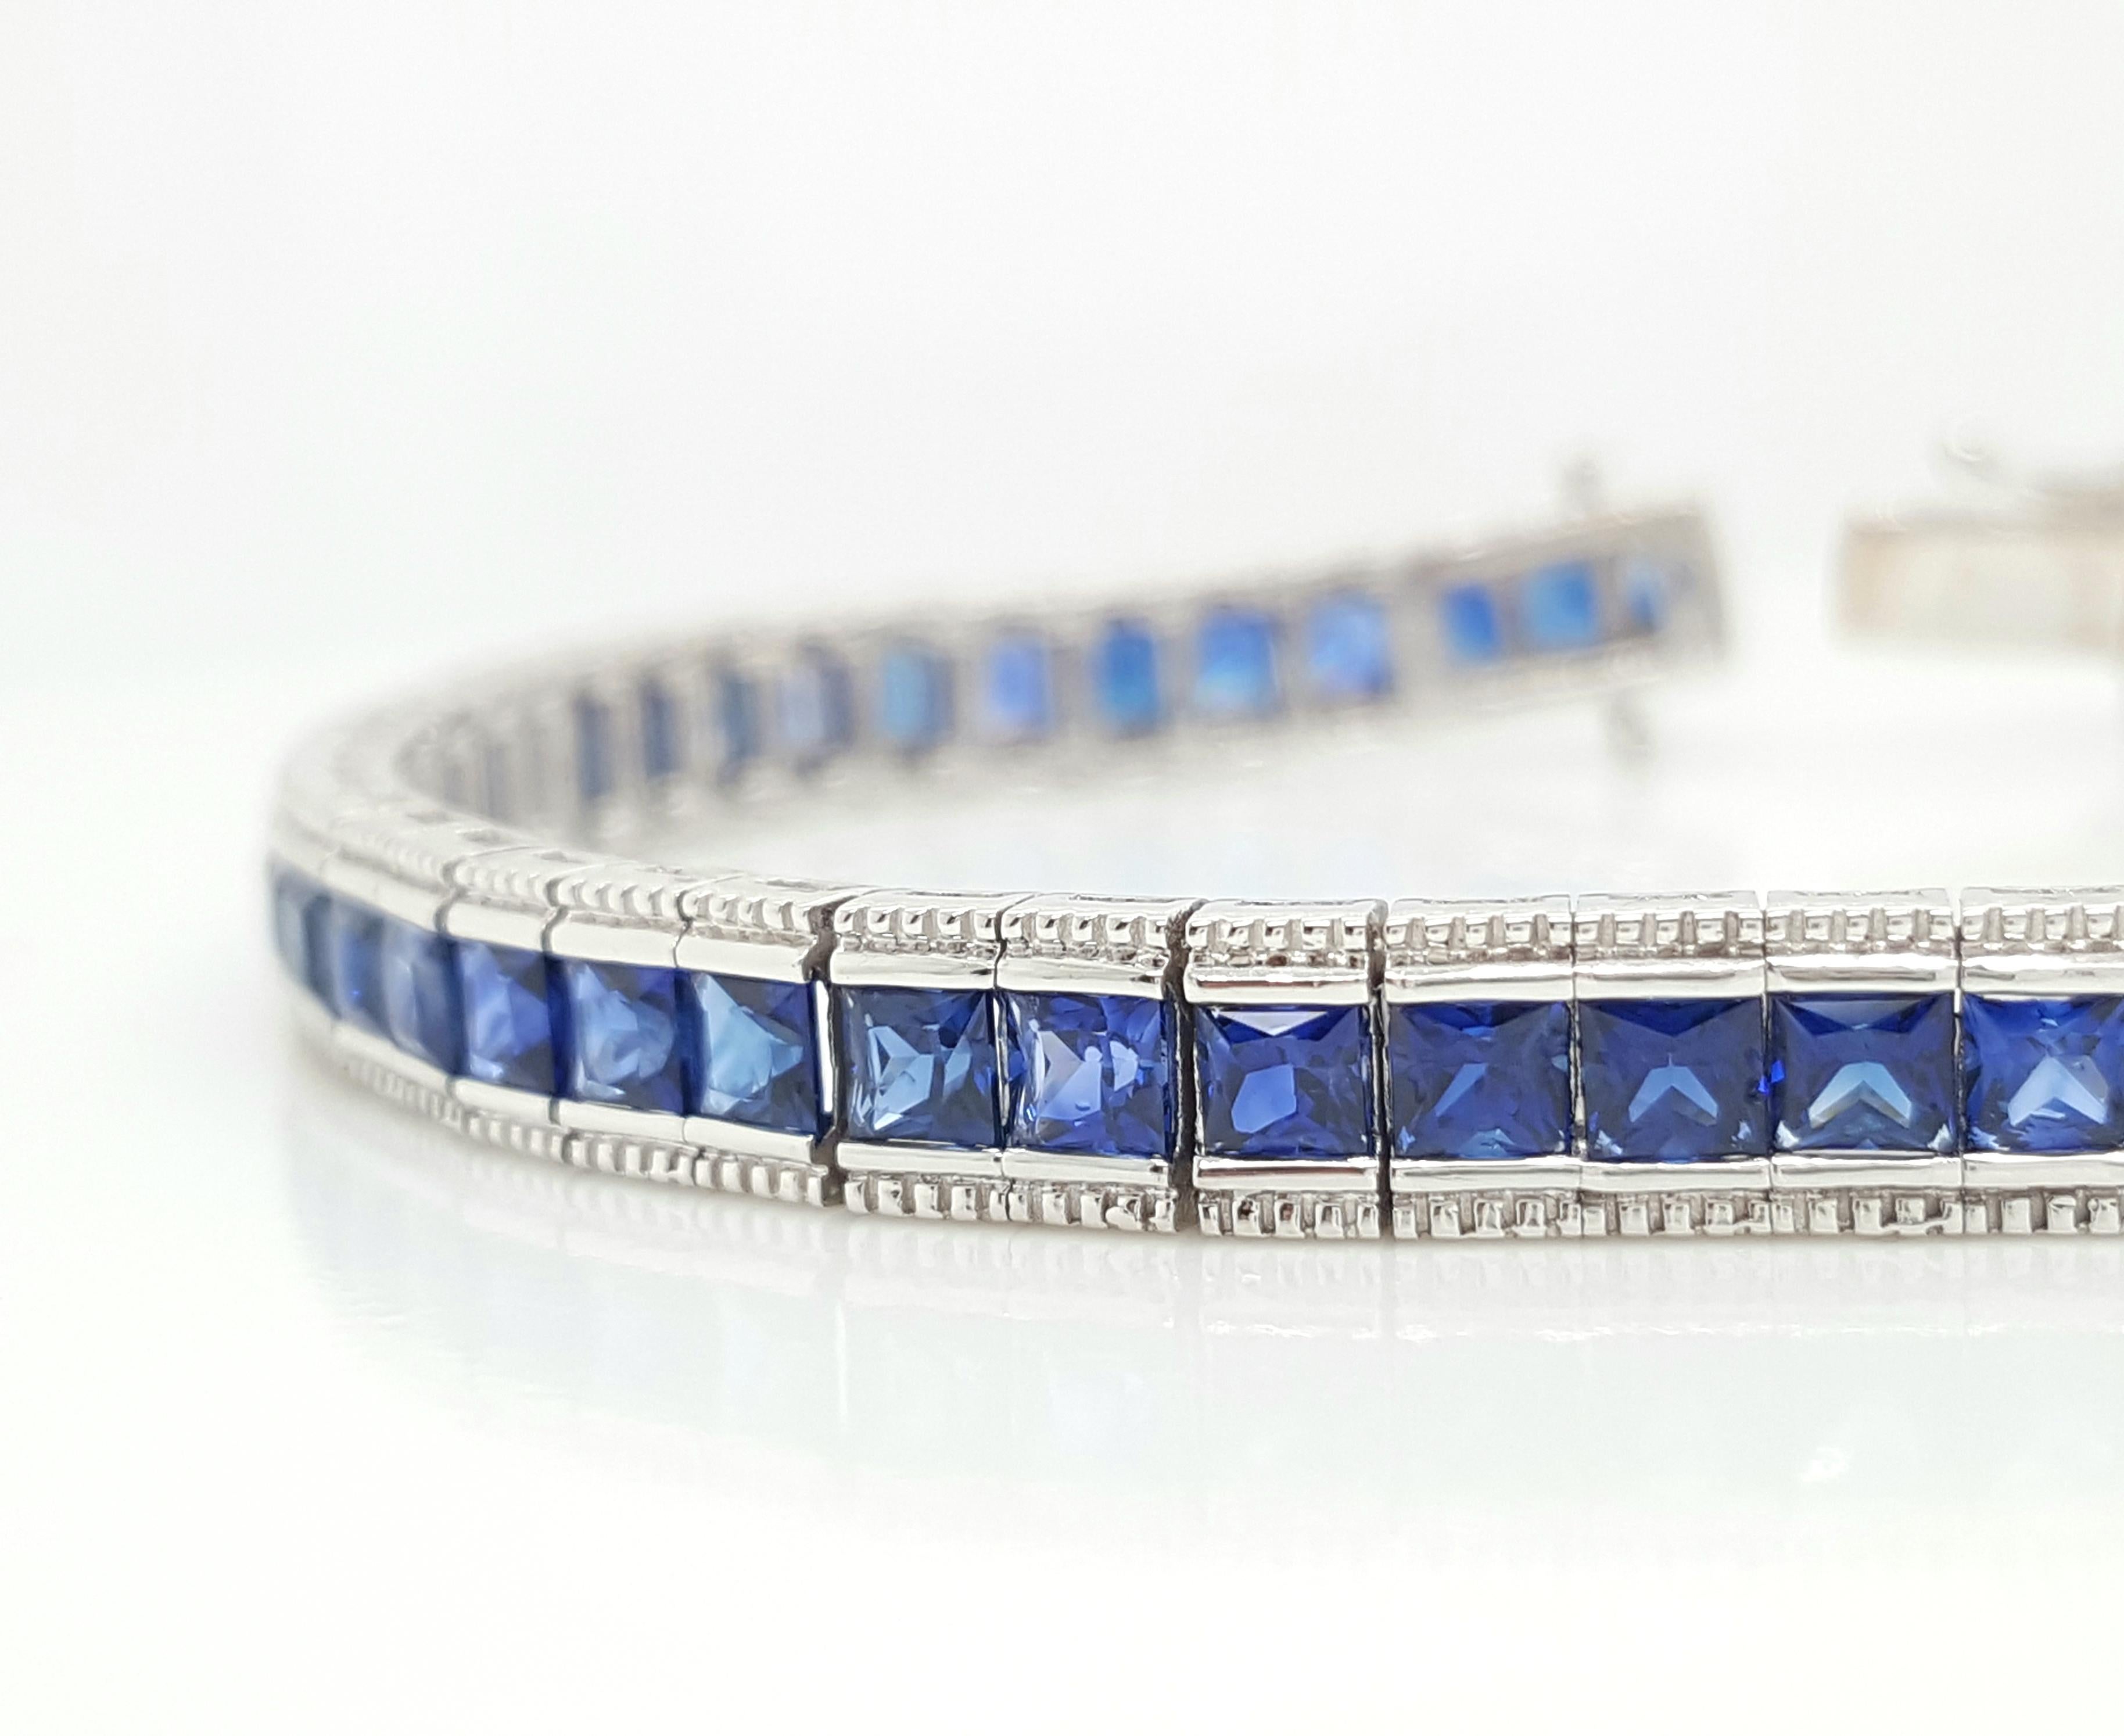 This incredible tennis bracelet is an absolute beauty. It is flowing with 7.40 carats of square, natural  bright royal blue sapphires . The bracelet is made of 18 karat white gold and sits on the the arm perfectly with flexibility. This bracelet is